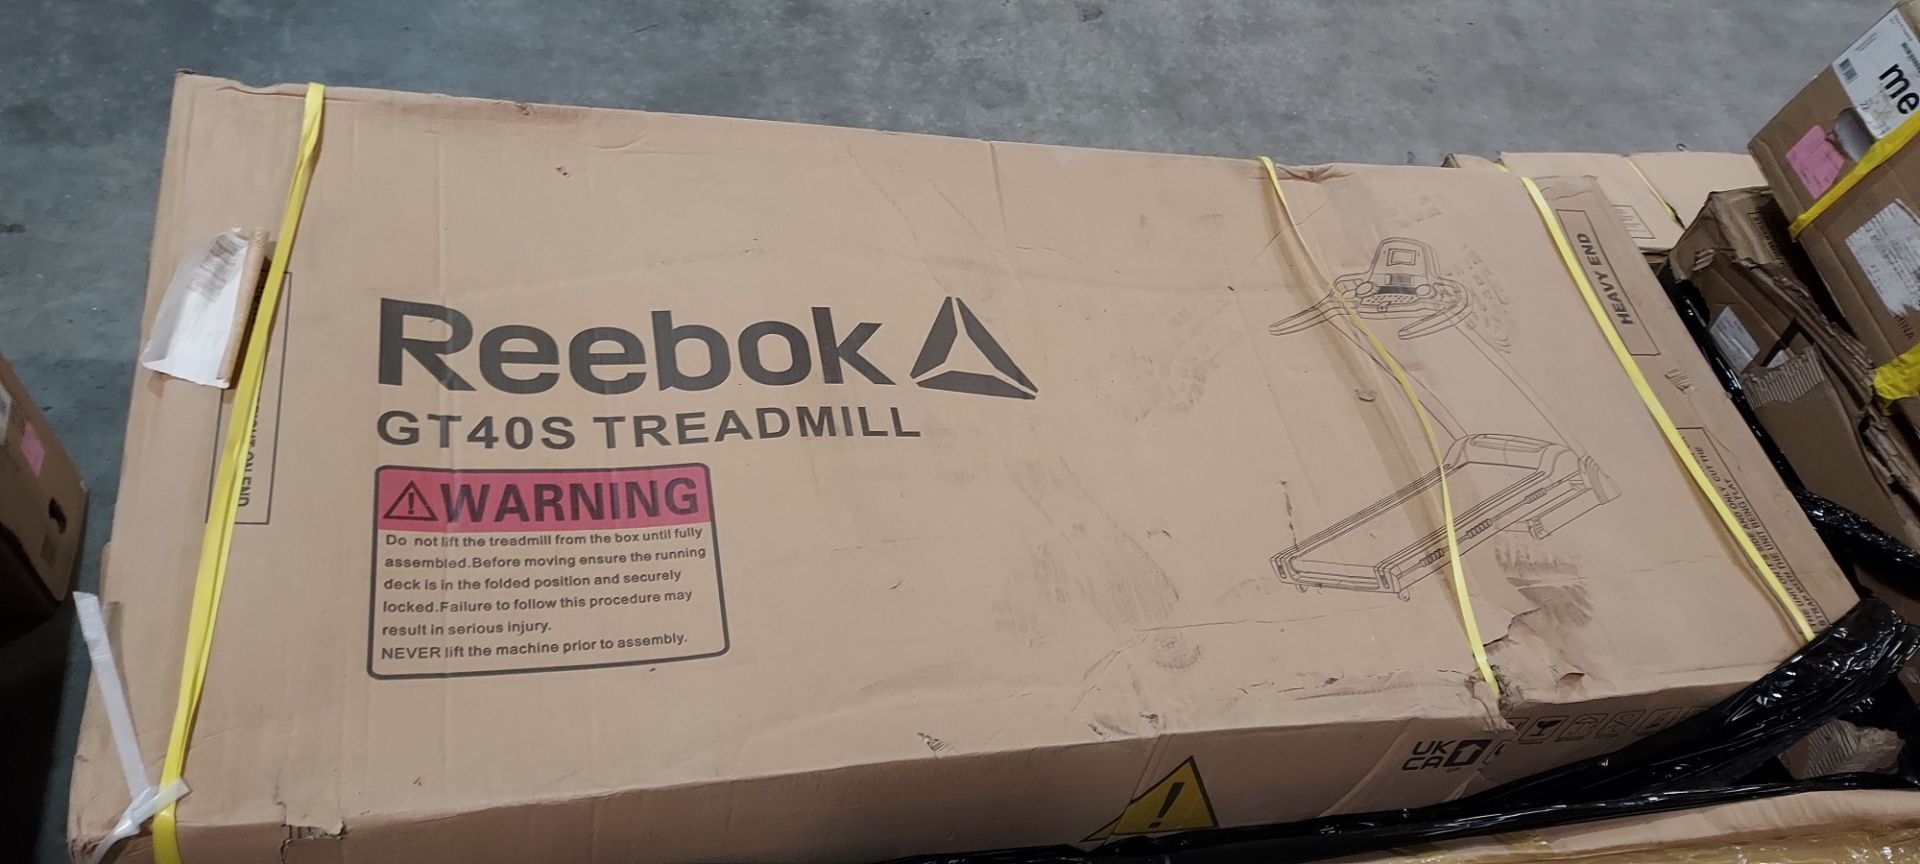 1 X BRAND NEW FACTORY SEALED REEBOK GT40S TREADMILL 00 IN BLACK GROSS WEIGHT 75KG (NOTE BOX SLIGHTLY - Image 2 of 2